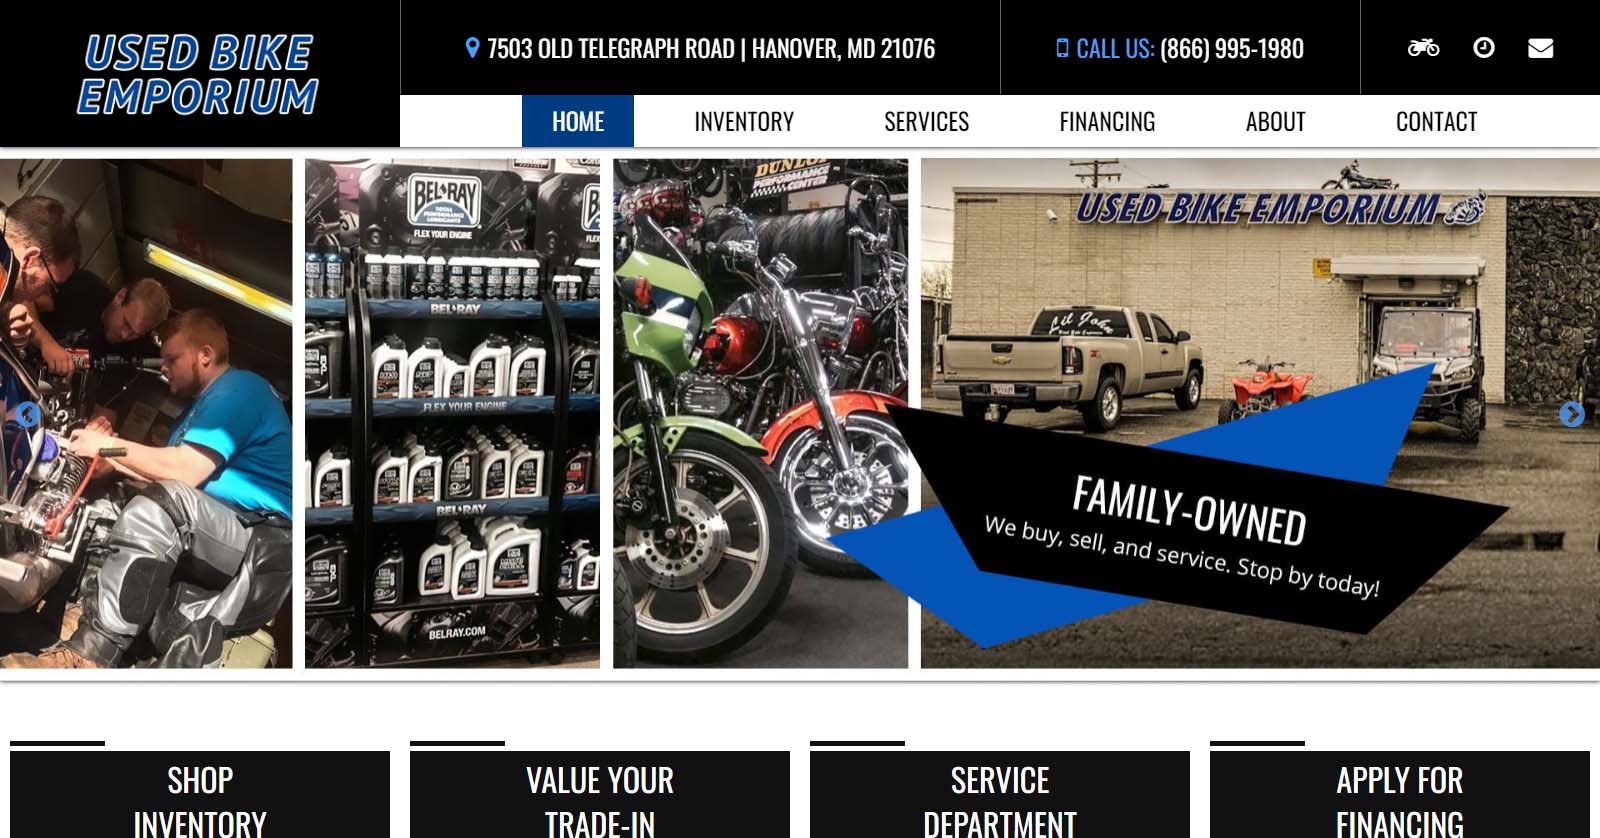 Used Bike Emporium Motorcycle Shop in Hanover MD Sales, Service, Parts